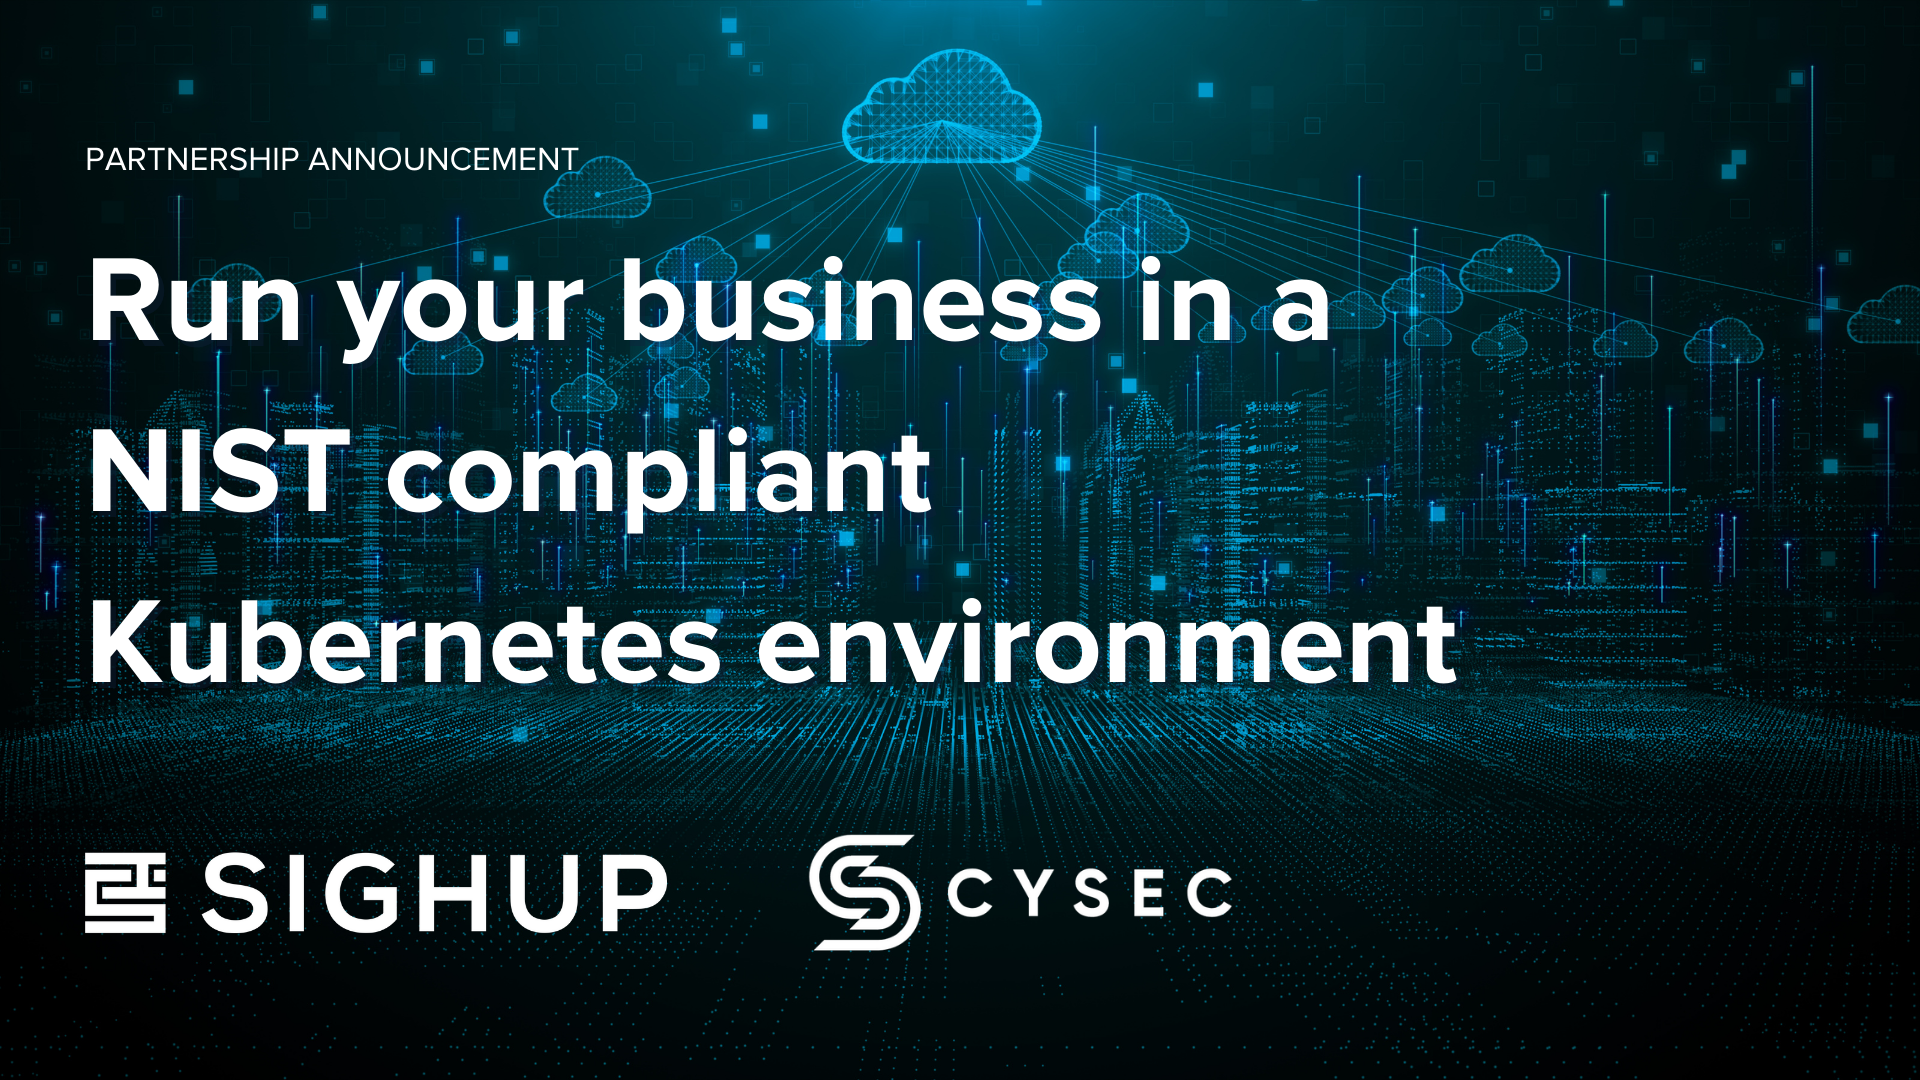 Run your business in a NIST compliant Kubernetes environment!